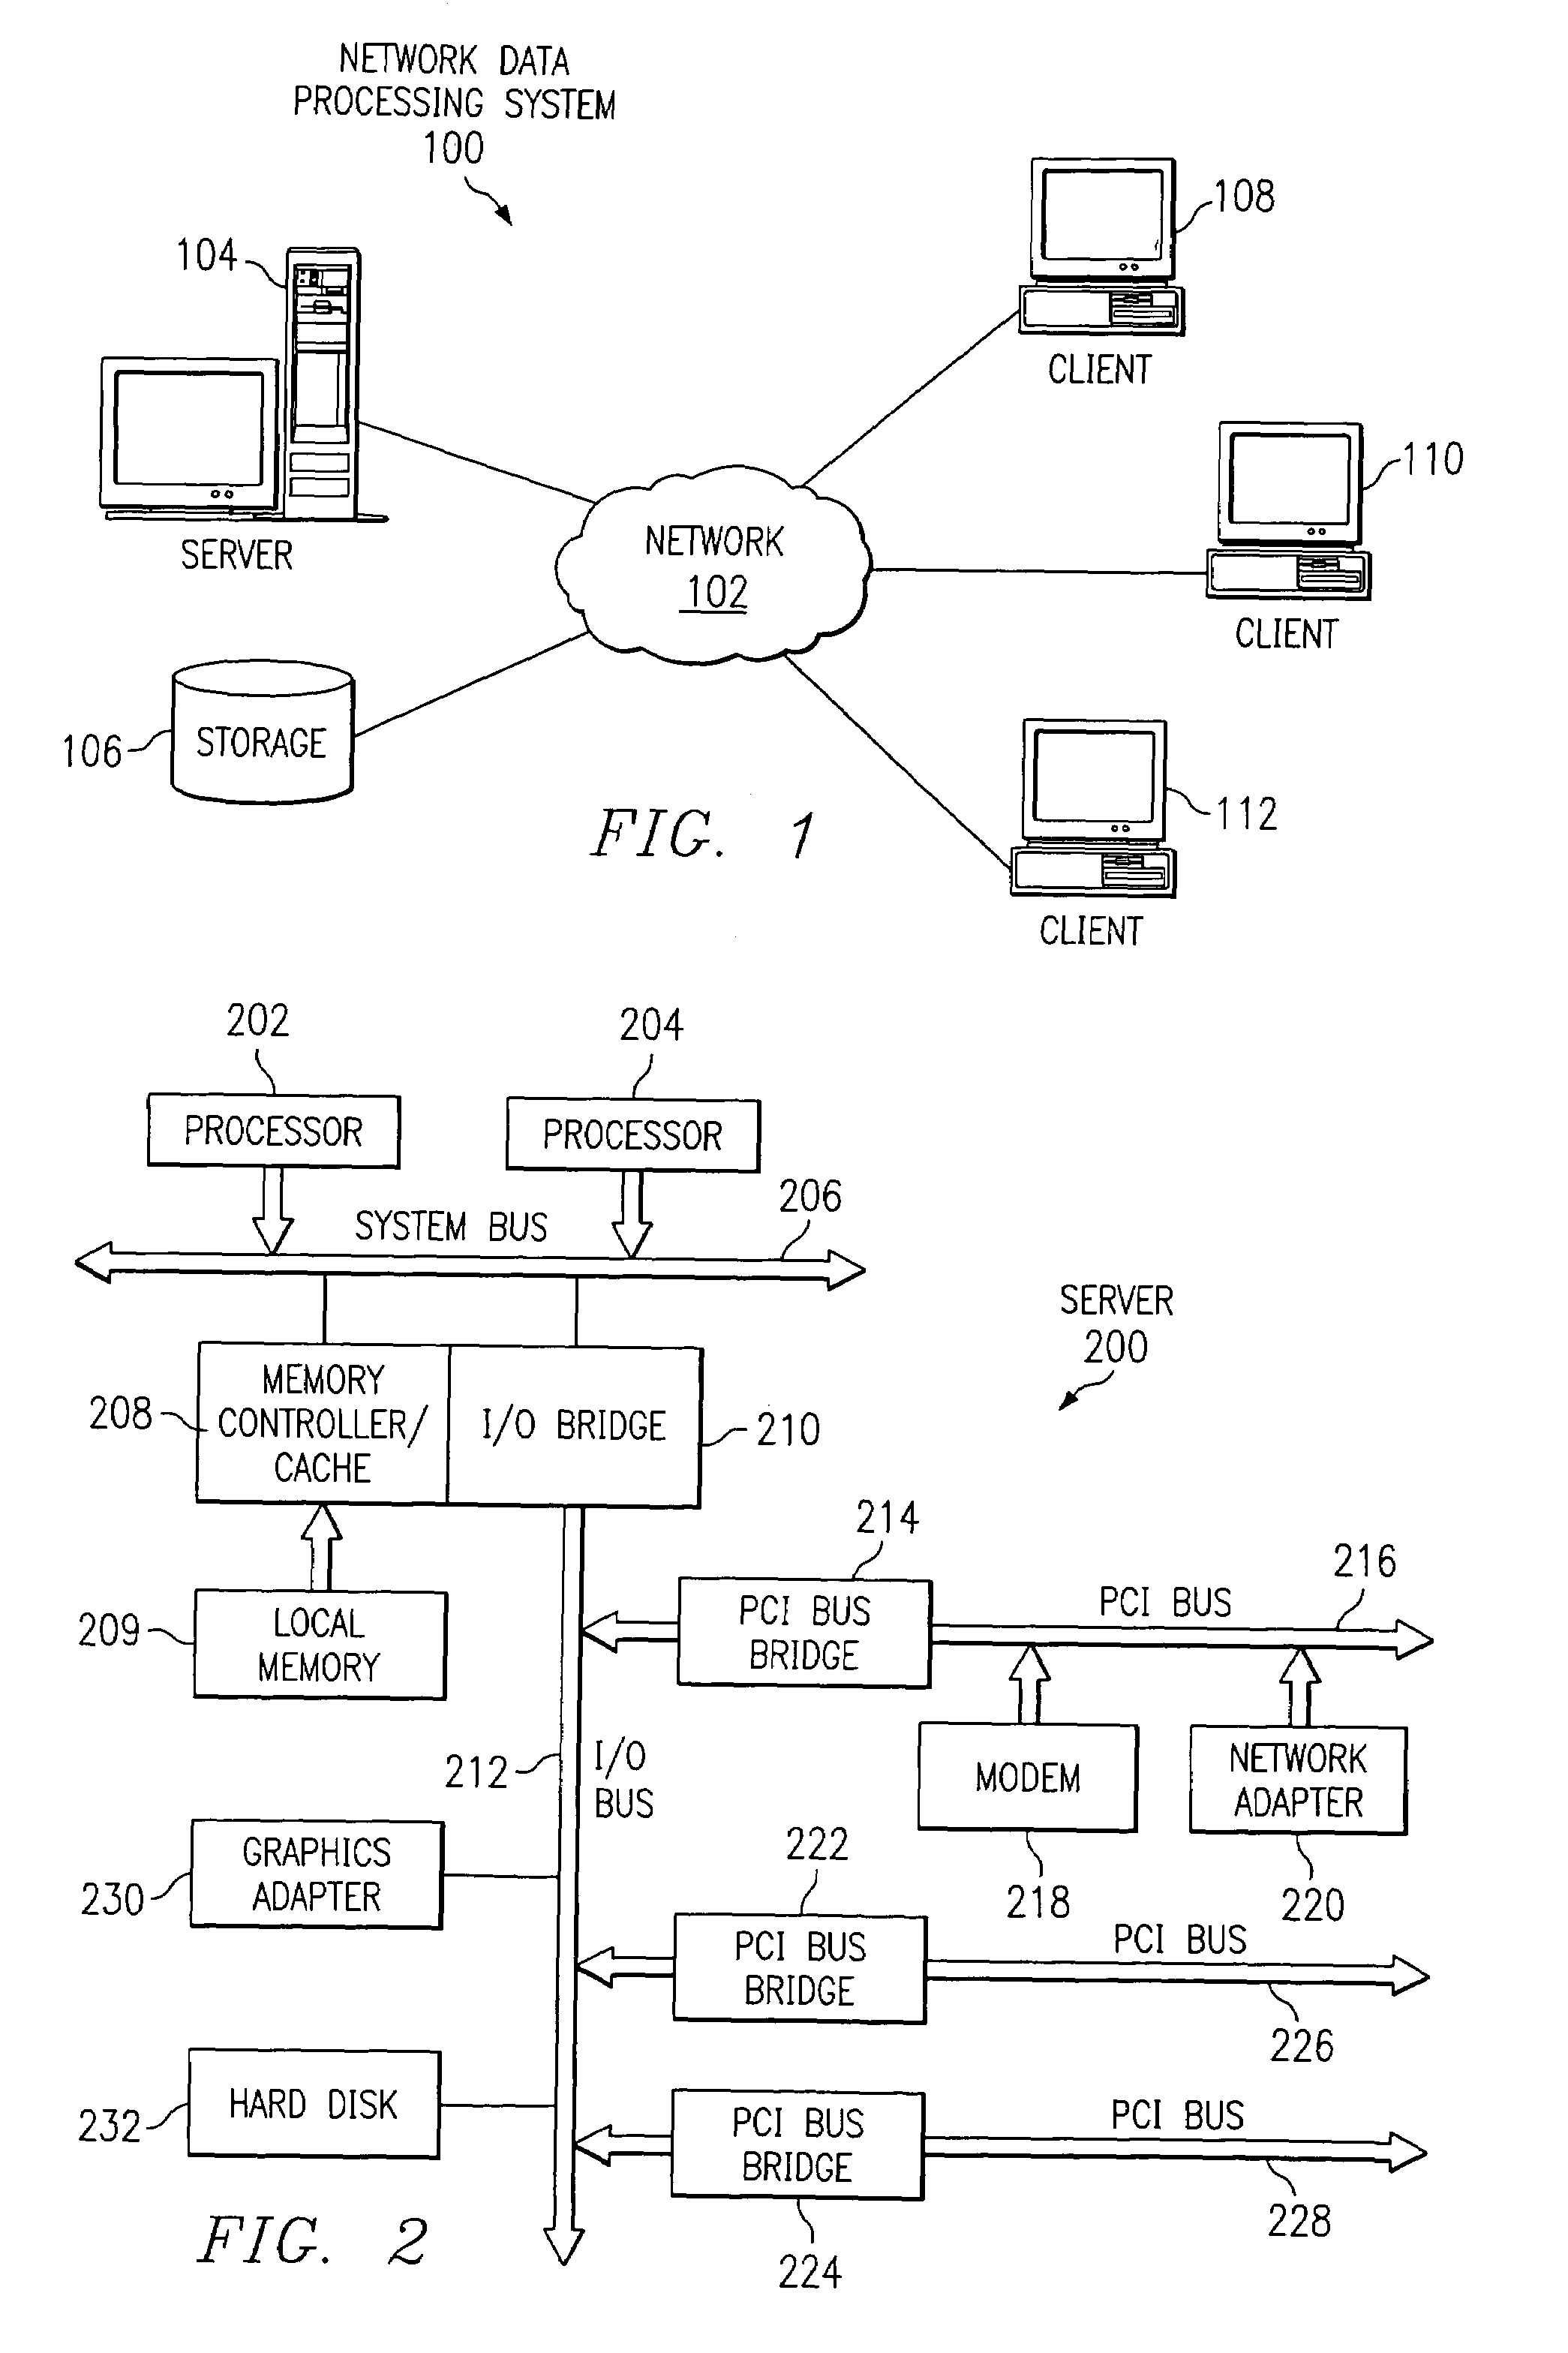 Mechanism to cache references to Java RMI remote objects implementing the unreferenced interface